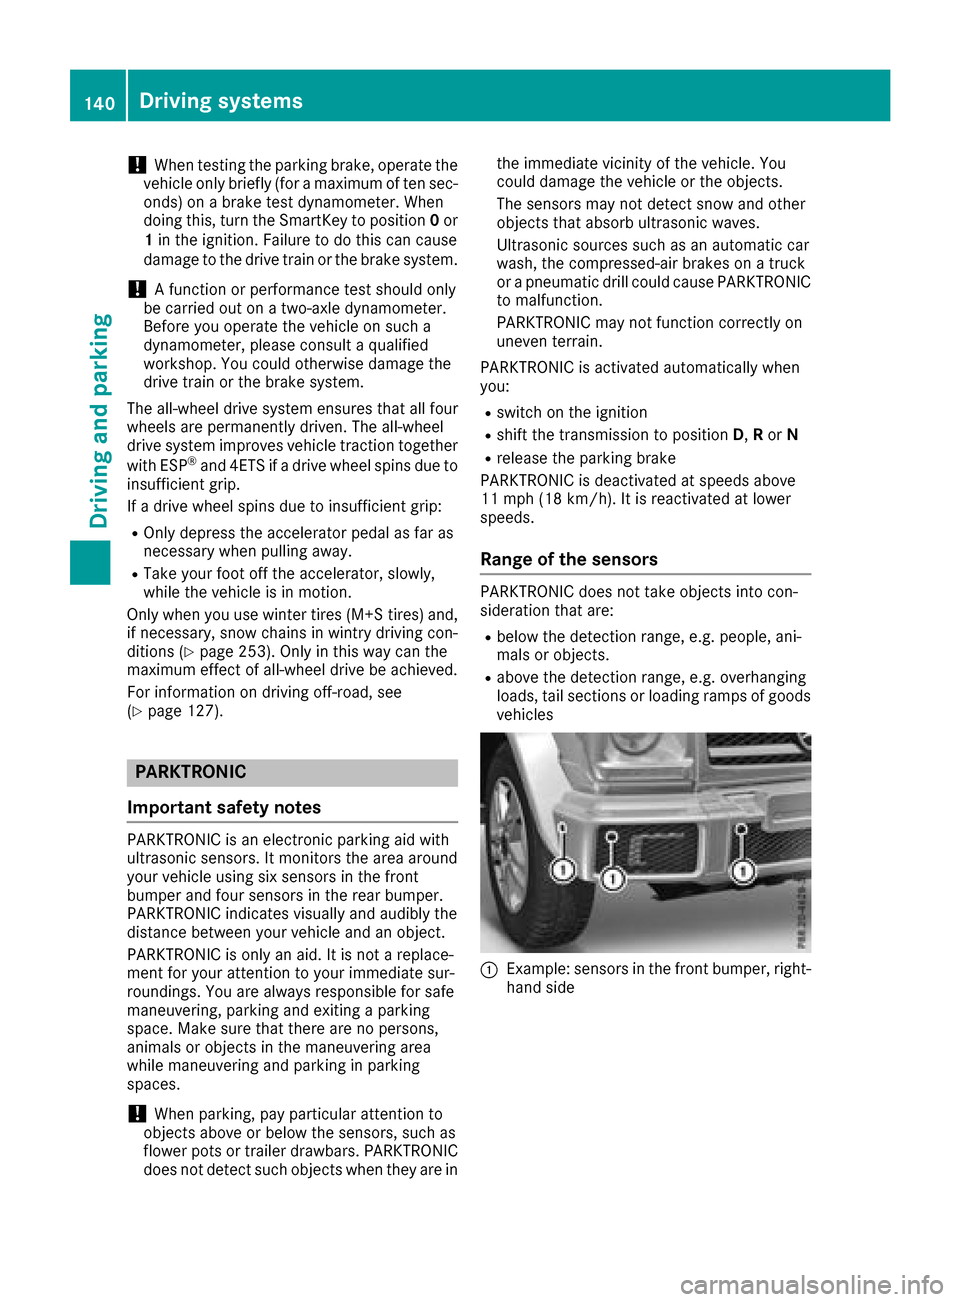 MERCEDES-BENZ G-Class 2017 W463 Owners Manual !When testing the parking brake, operate the
vehicle only briefly (for amaximum of ten sec-
onds) on abrake test dynamometer. When
doing this, turn the SmartKey to position 0or
1 in the ignition. Fail